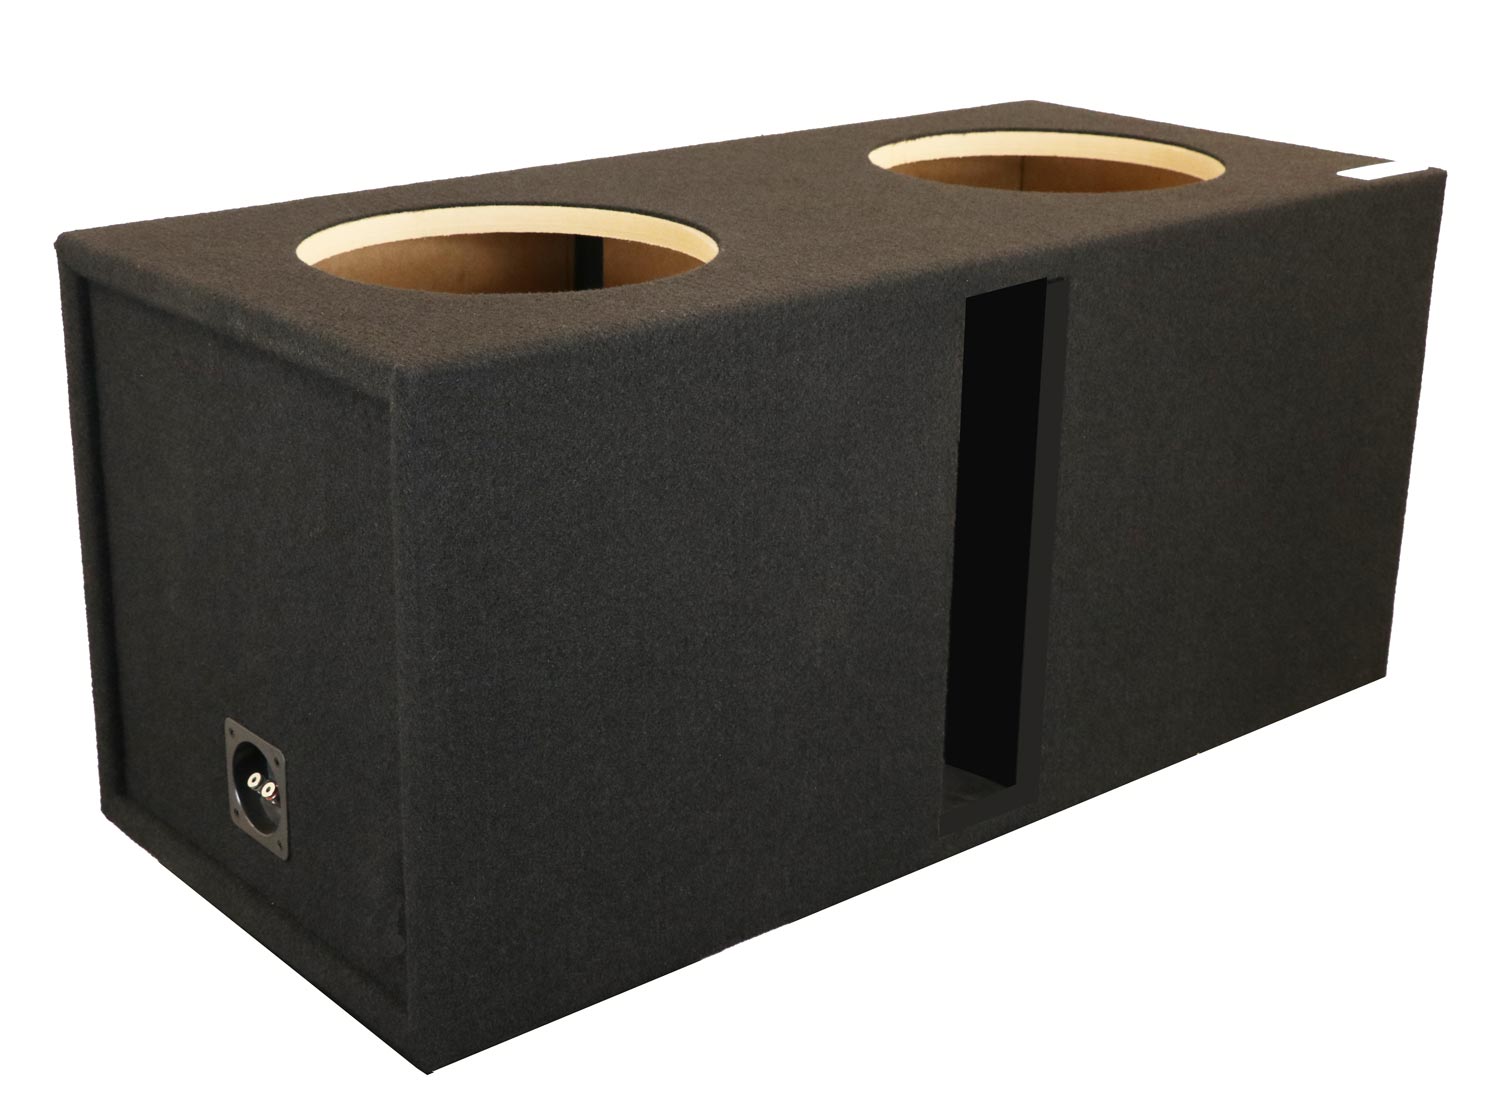 15SDDV Dual 15 Ported box for Sundown LCS, EV, DS, and SA Subwoofers